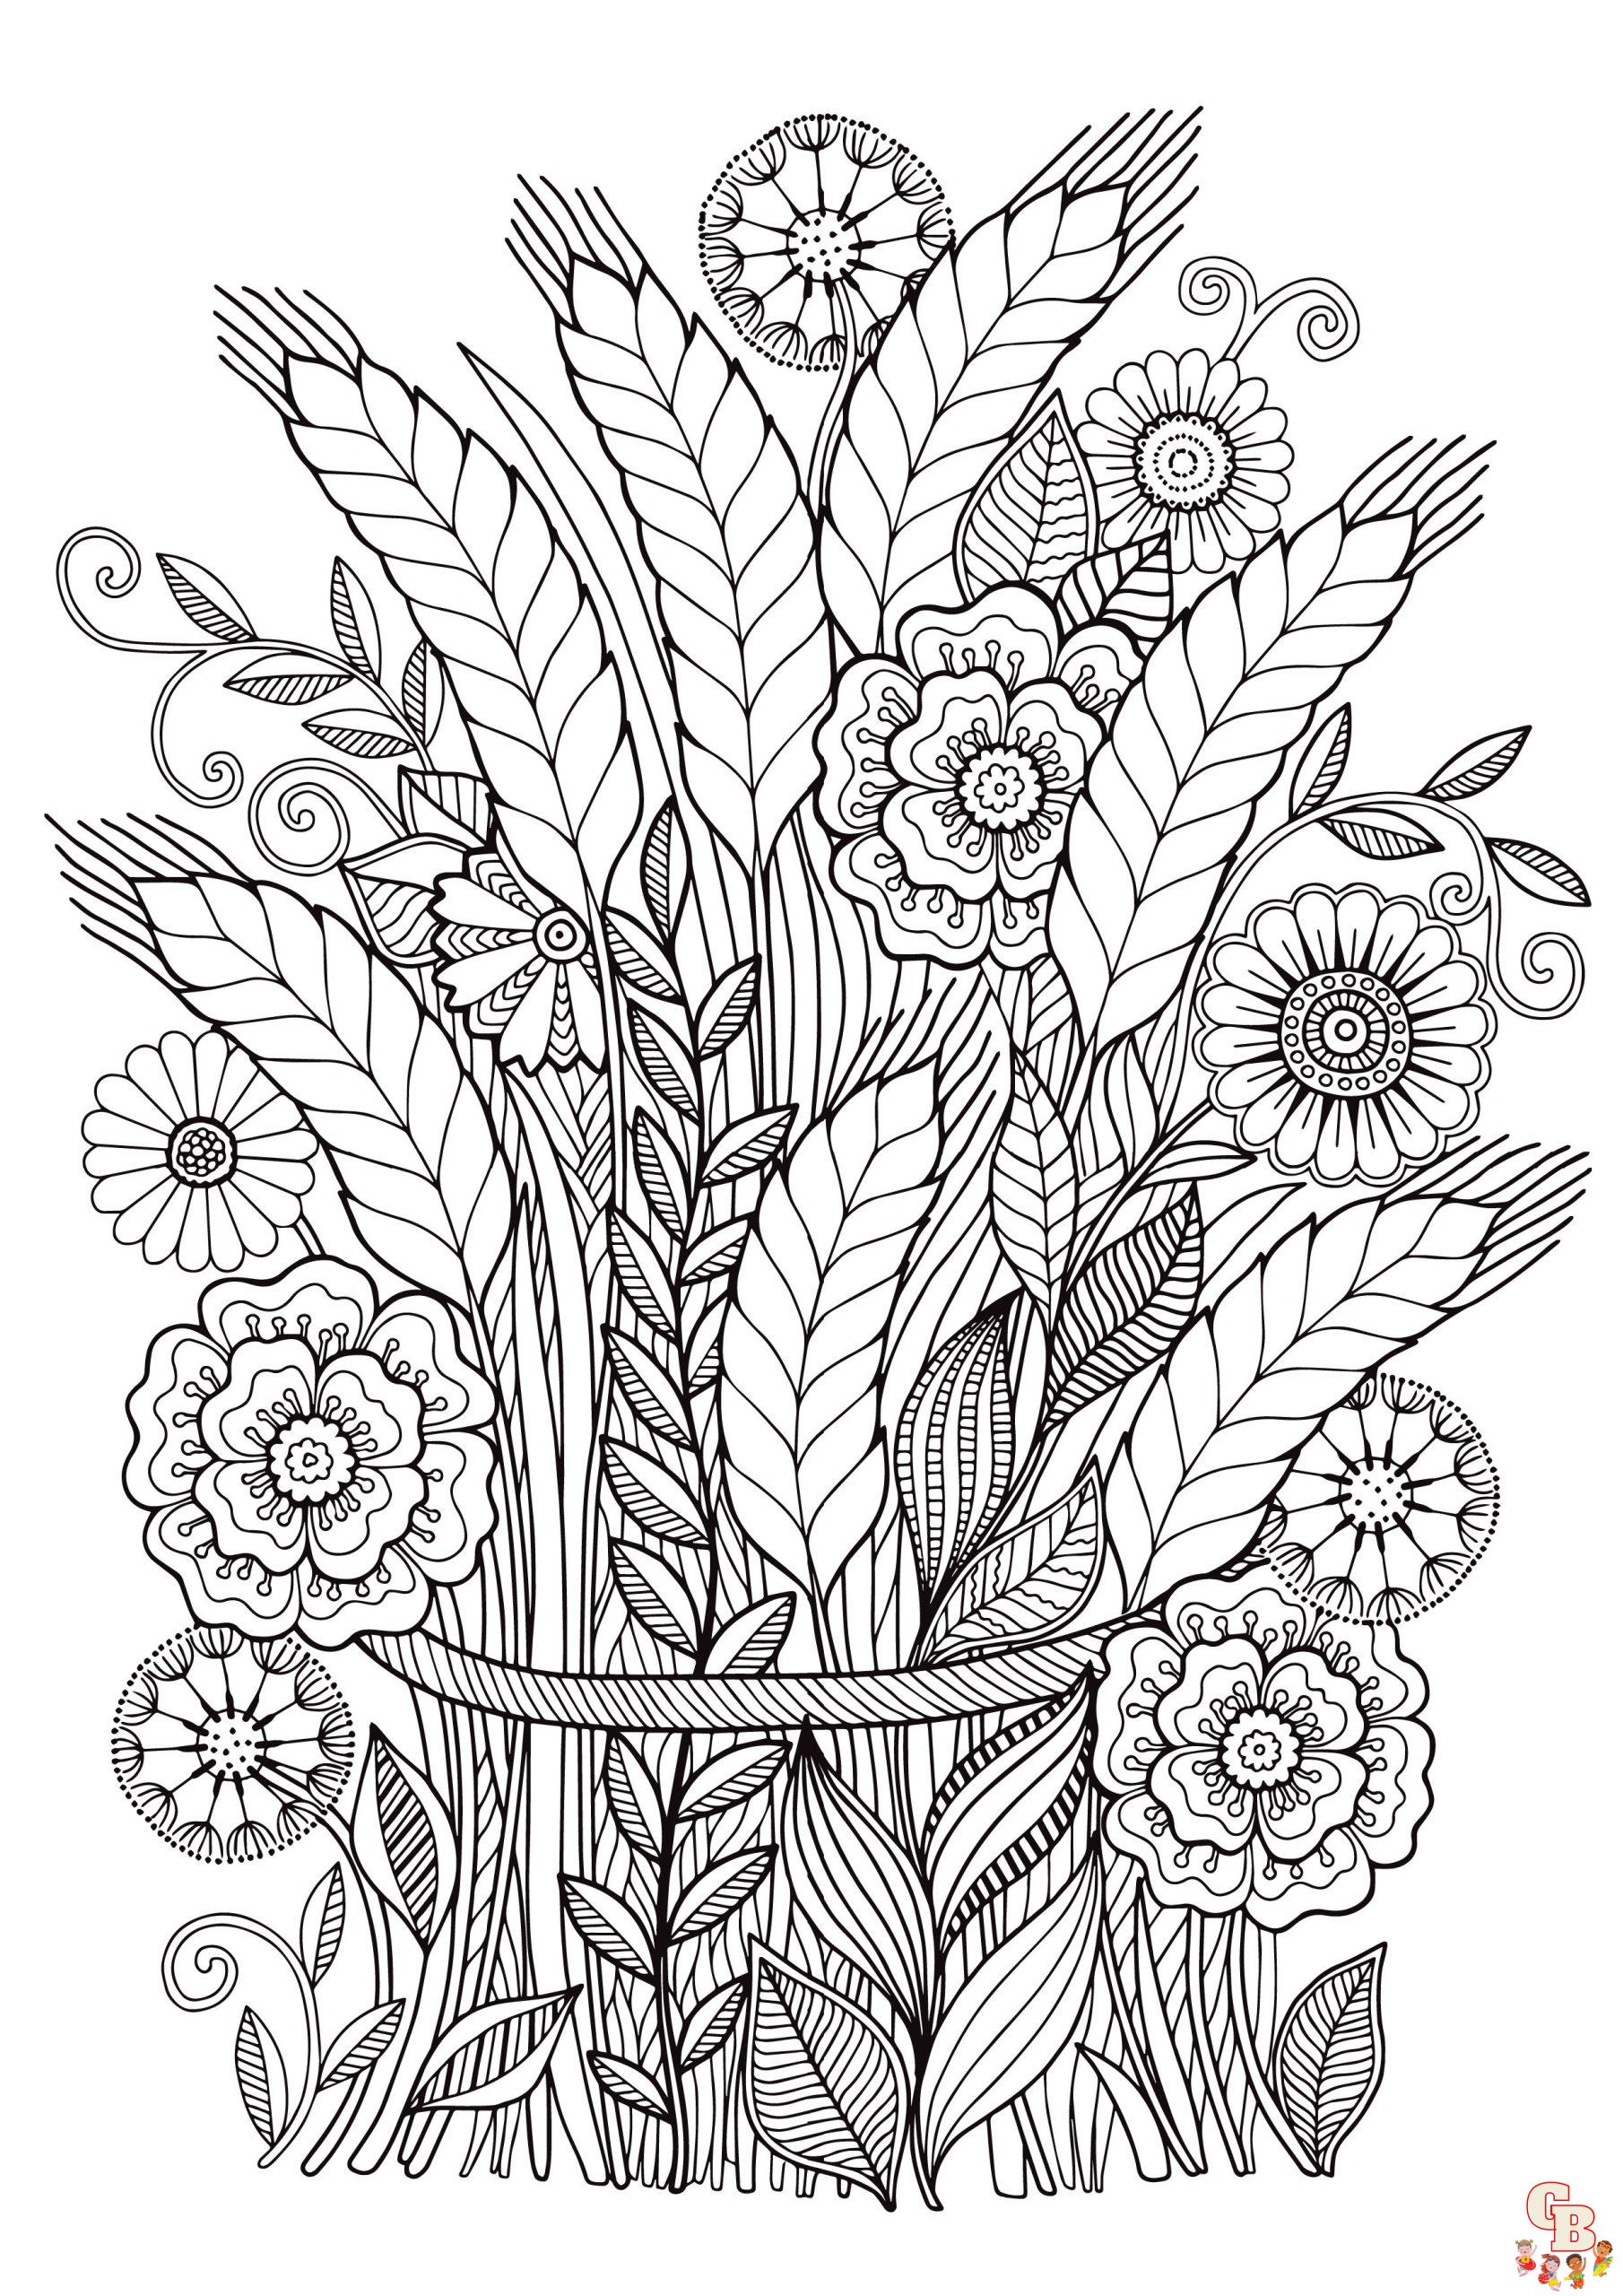 Digital Coloring Pages 6